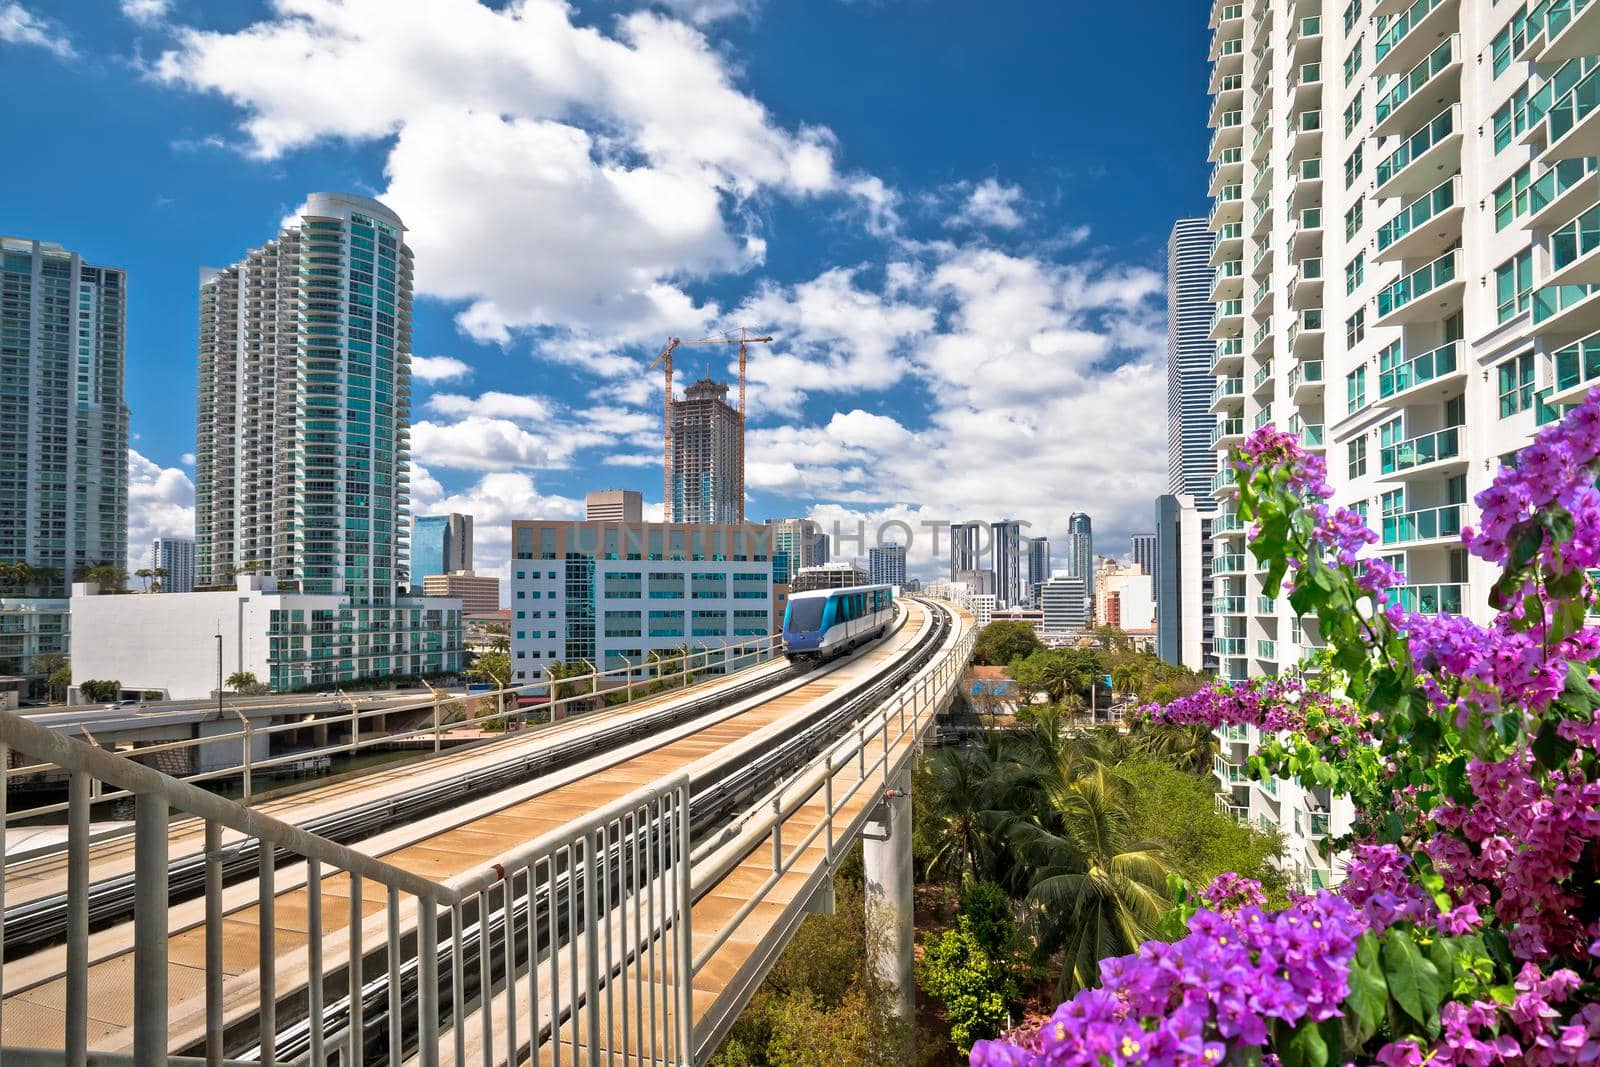 Miami downtown skyline and futuristic mover train colorful view, Florida state, United States of America